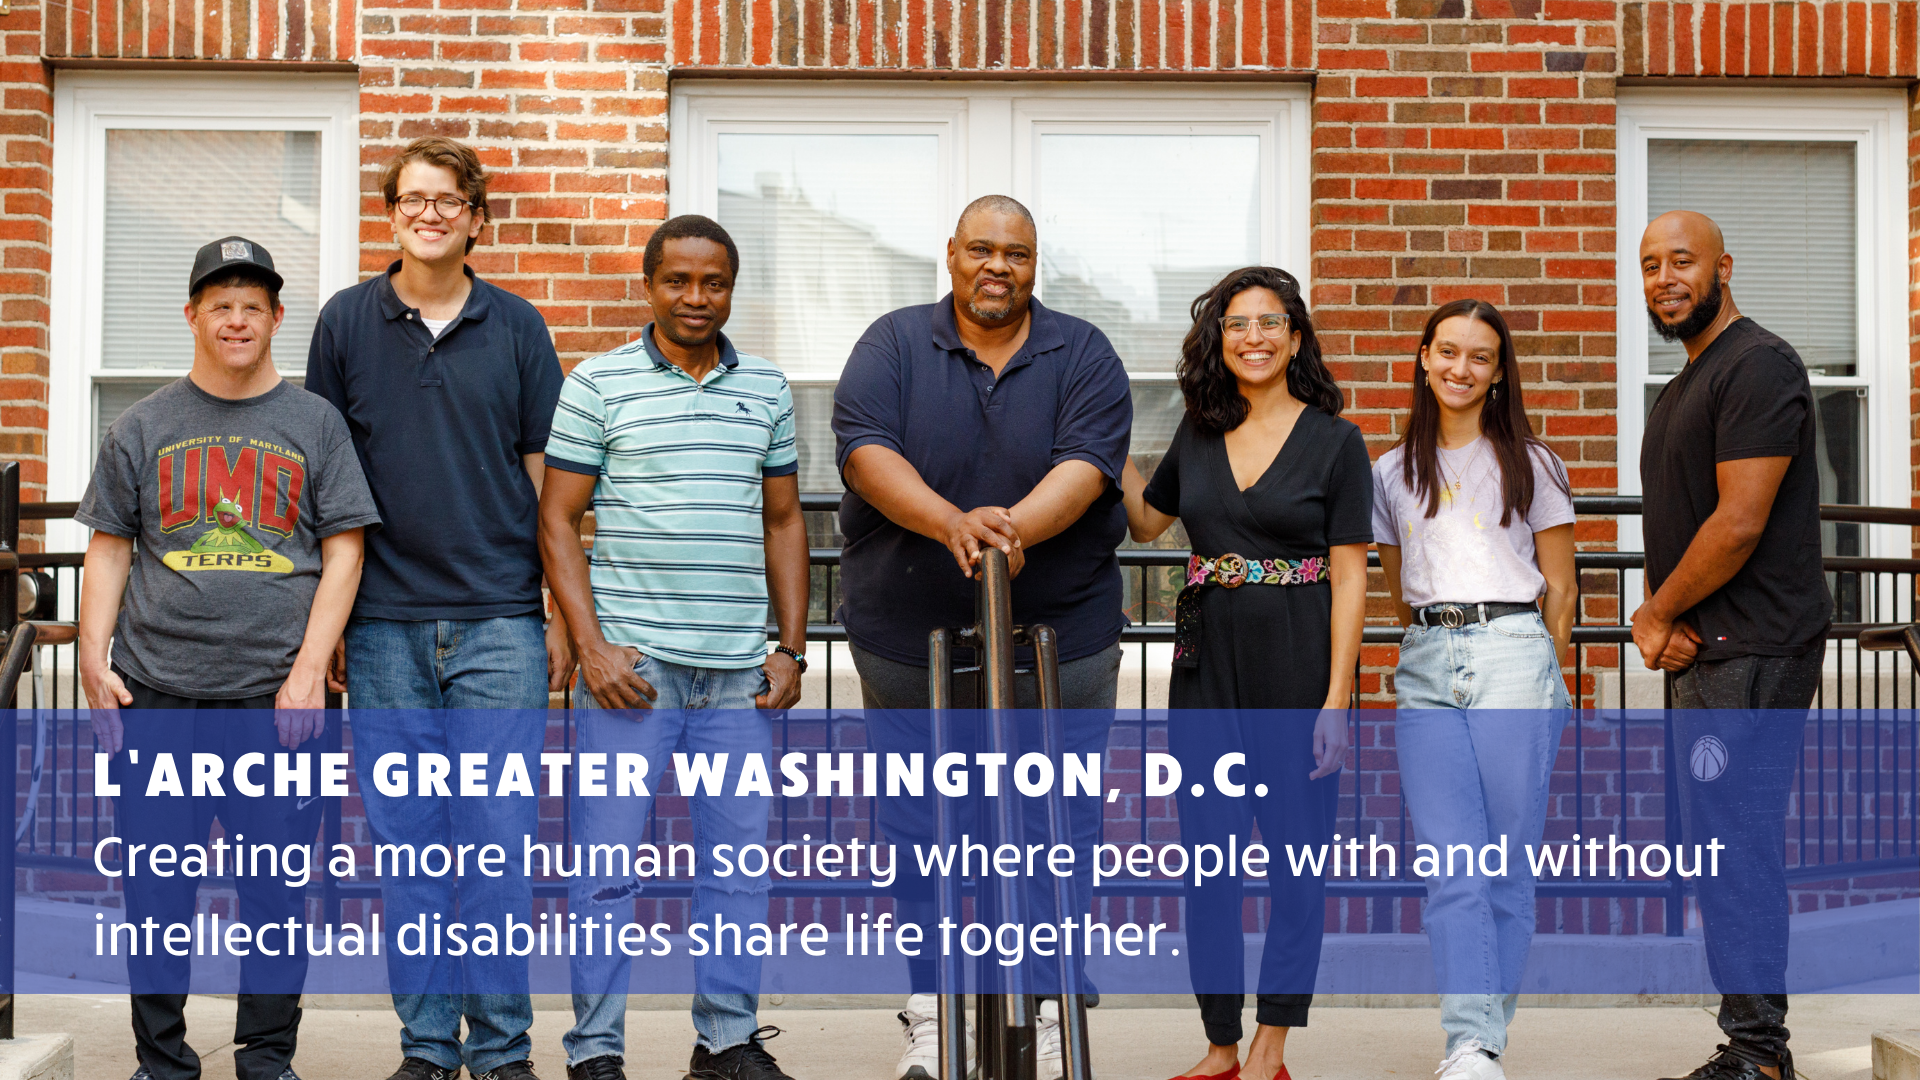 Creating a more human society where people with and without intellectual disabilities share life together